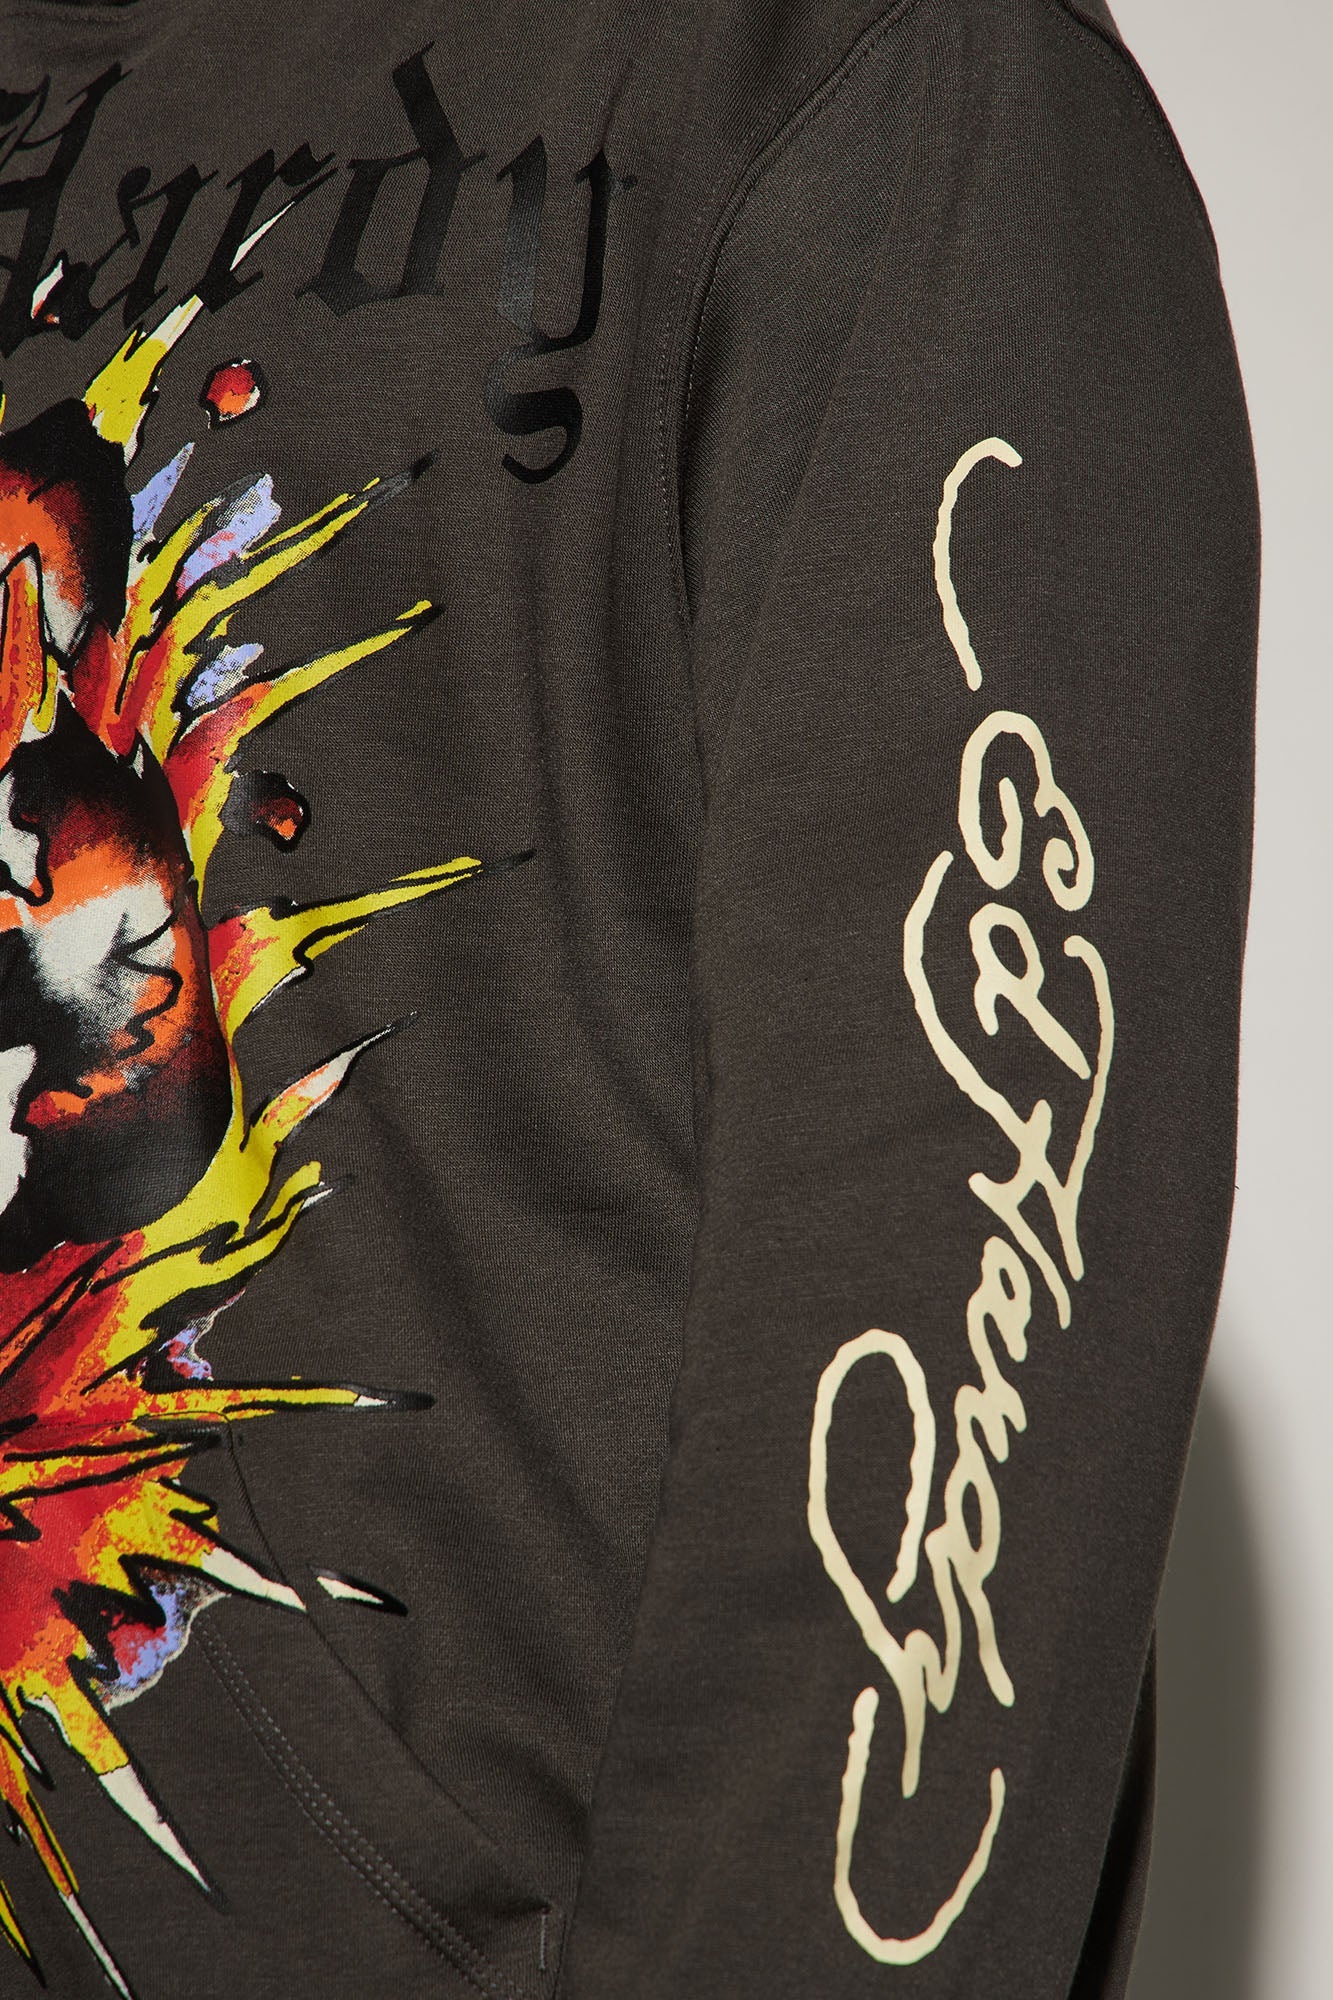 Ed Hardy Exploding Skull Hoodie in Charcoal – Rocker Chic Style